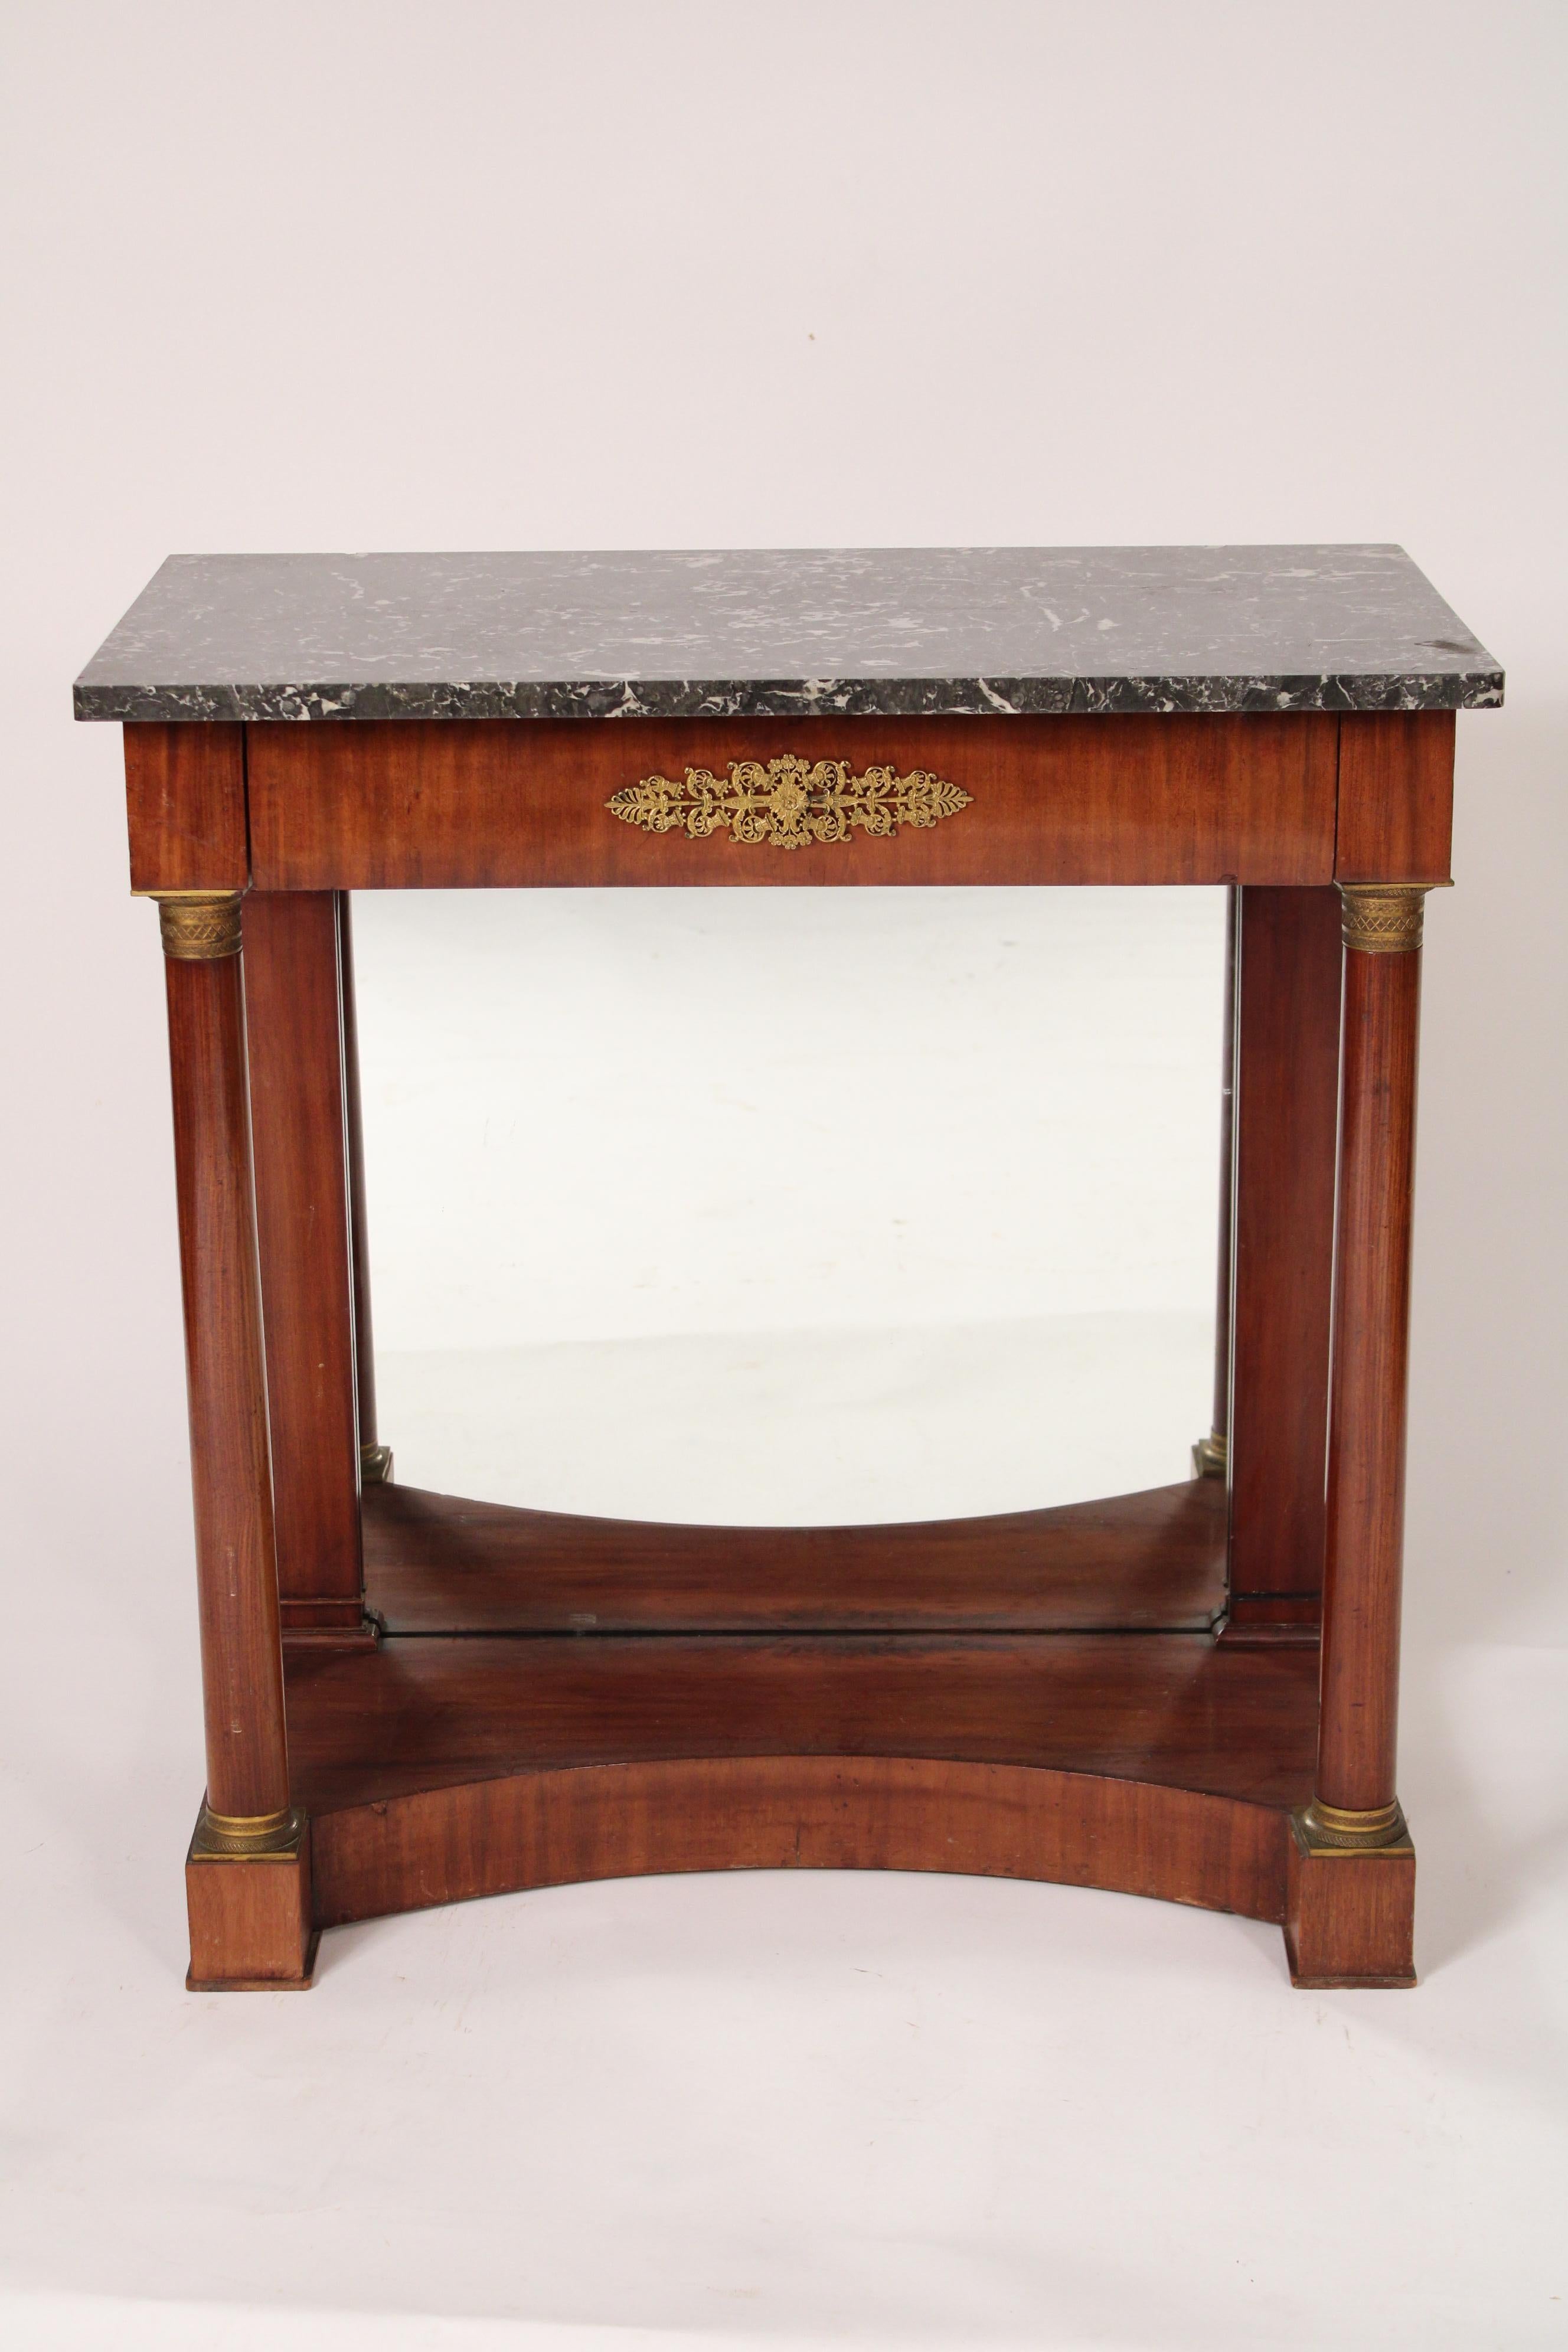 Antique Empire style mahogany console table with a marble top, circa 1900. With a rectangular grey and white marble top with slightly rounded front corners, a frieze drawer with a well chased brass plaque with bells and flowers, two columns with